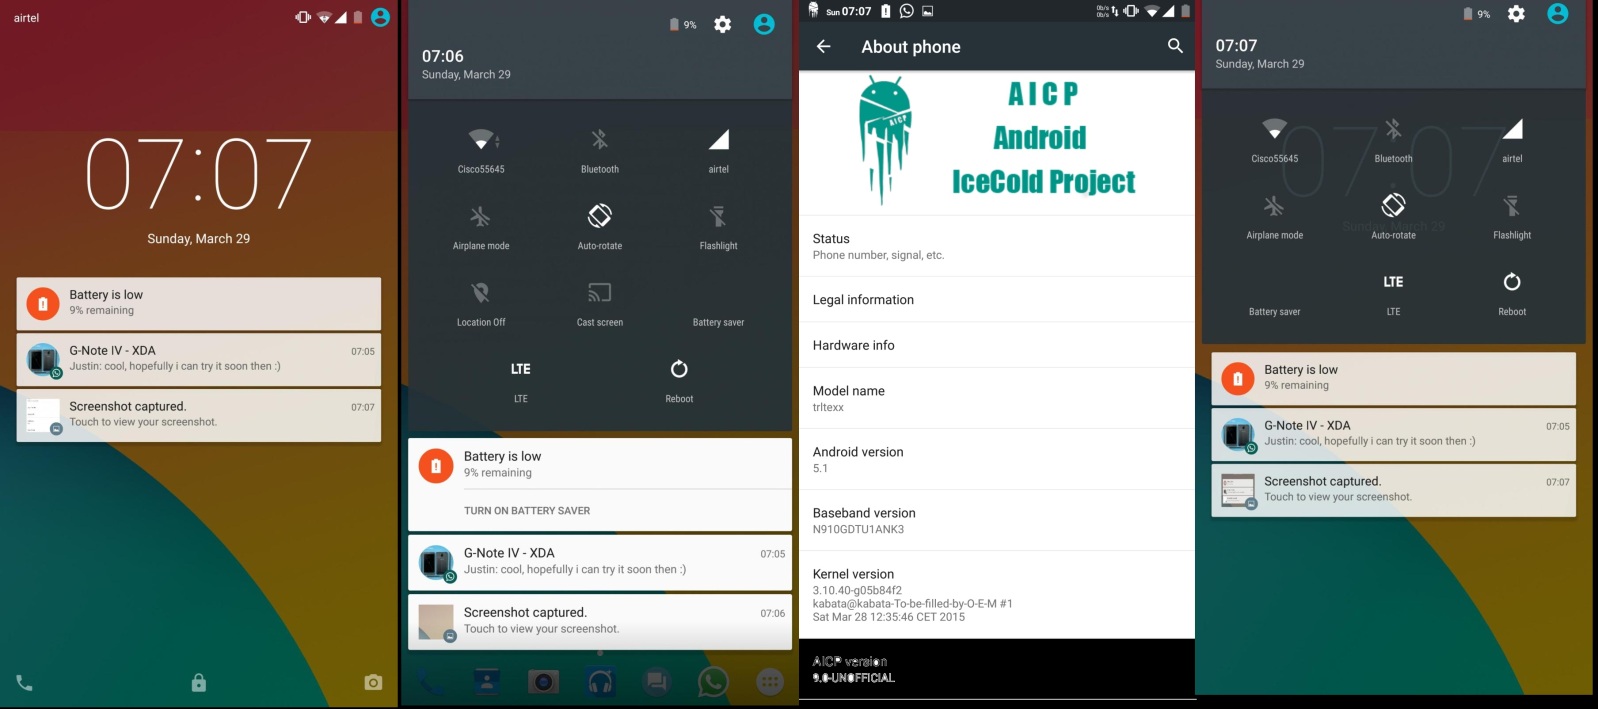 Unofficial Android 5 1 Aicp Rom Hits Galaxy Note 4 Sm N910f And N910g How To Install